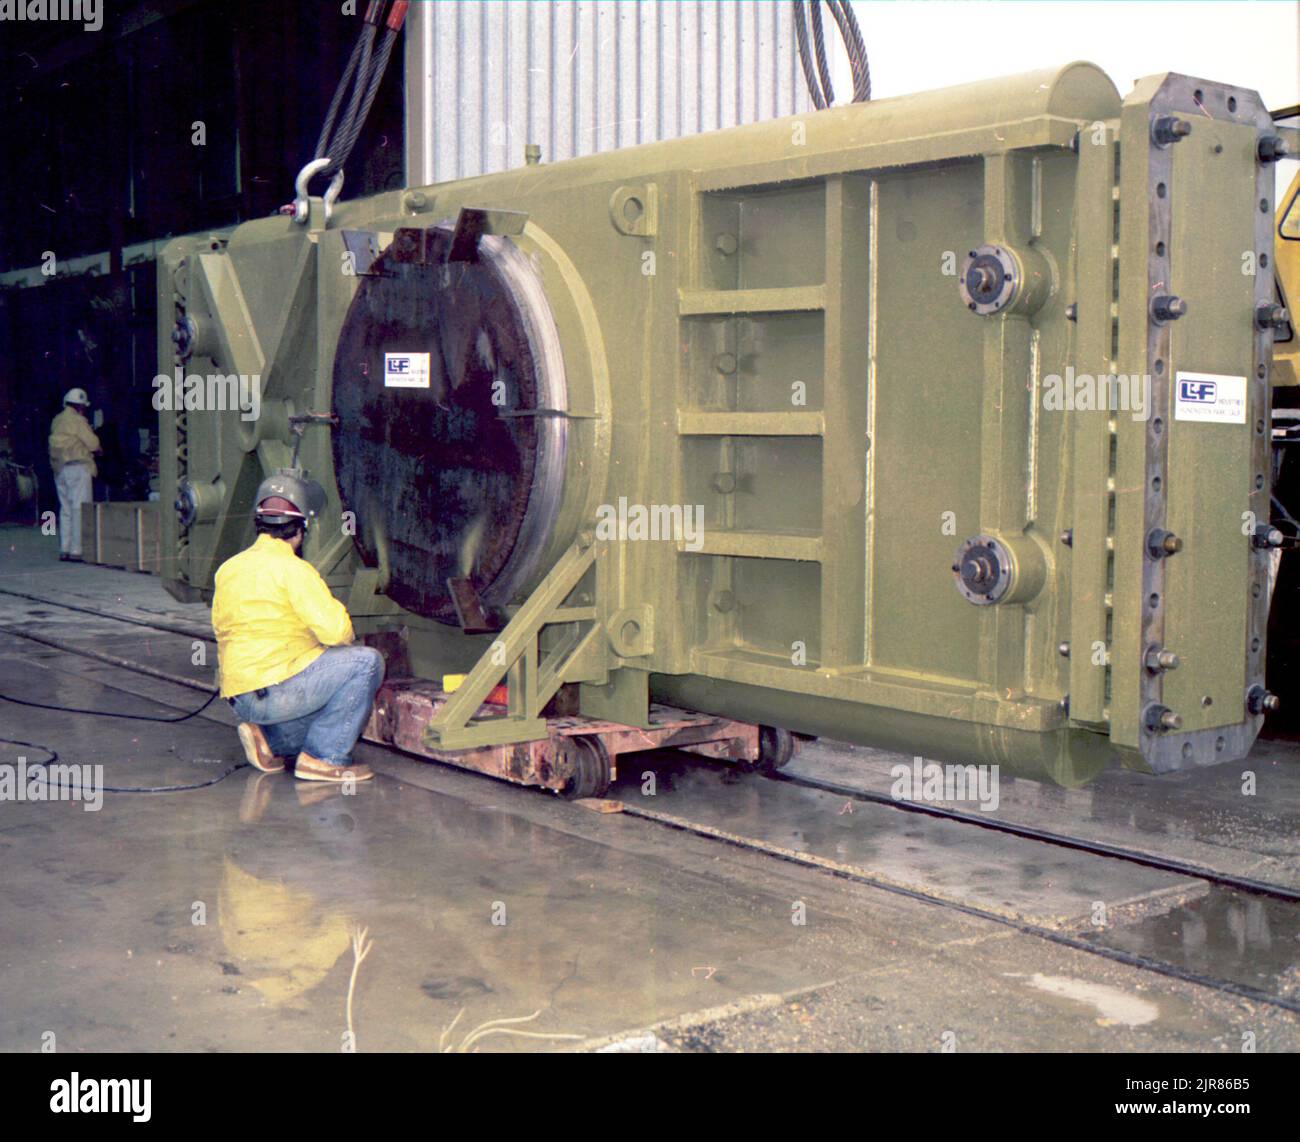 A800142 U12N MINERS IRON DAC UNLOADING TEISHER(Project Engineer) JAN 7 80EG&G/NTS PHOTO LAB Publication Date: 1/7/1980  DAC UNLOADING; DACS; EQUIPMENT & INSTRUMENTS; HARD HATS; INSTRUMENTS & EQUIPMENT; MINERS IRON; MINERS, IRON ORE; MINES (WEAPON); N-TUNNEL; NEVADA; NEVADA TEST SITE; NTS; NUCLEAR ENERGY TECHNOLOGY; TEST SITES; UGT; UNDERGROUND TESTING  historical images. 1972 - 2012. Department of Energy. National Nuclear Security Administration. Photographs Related to Nuclear Weapons Testing at the Nevada Test Site. Stock Photo